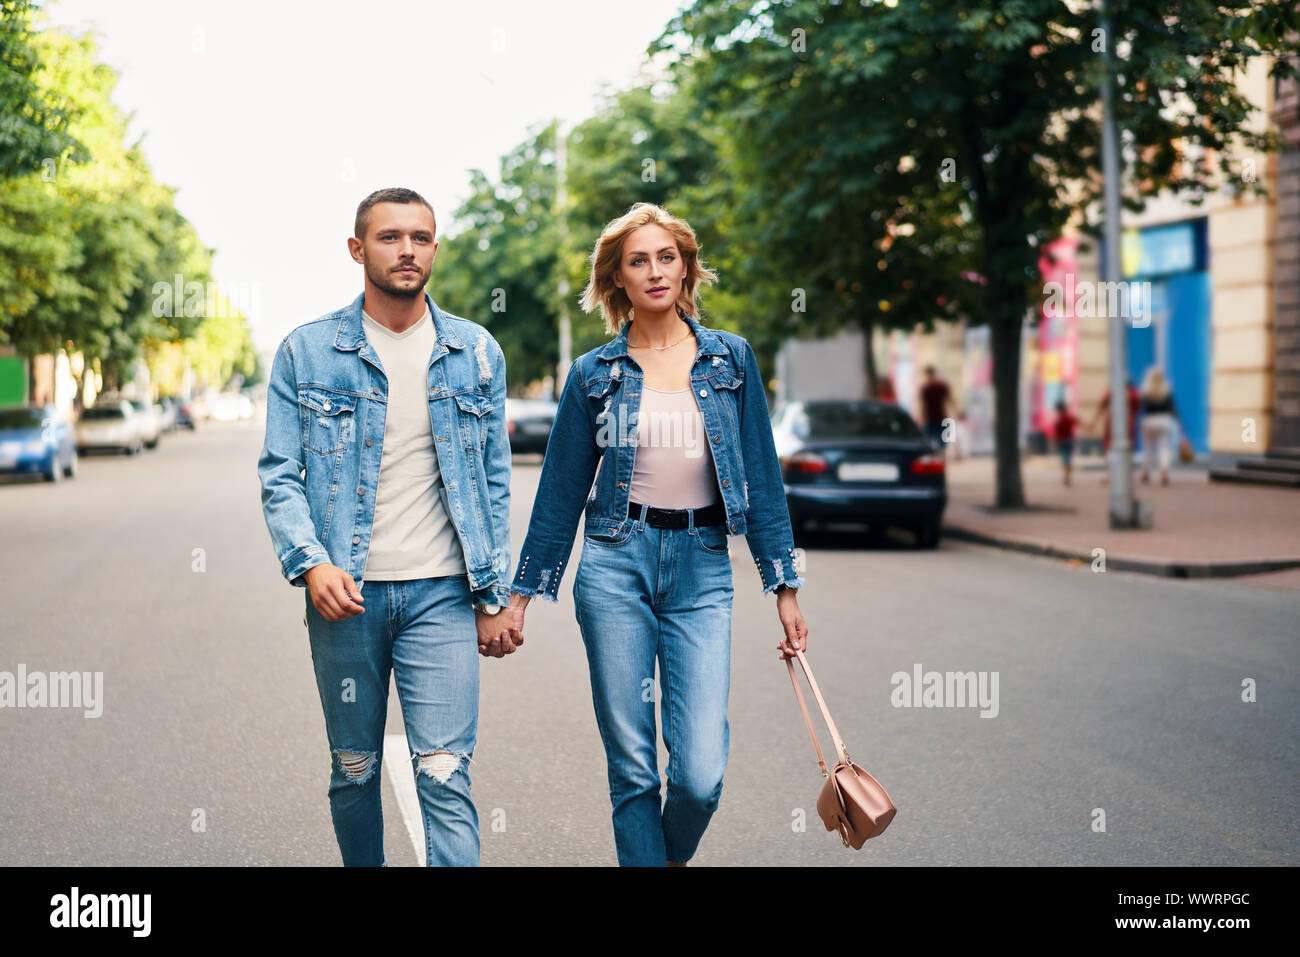 Beautiful young couple holding hands and smiling while walking outdoors. Love, dating concept Stock Photo